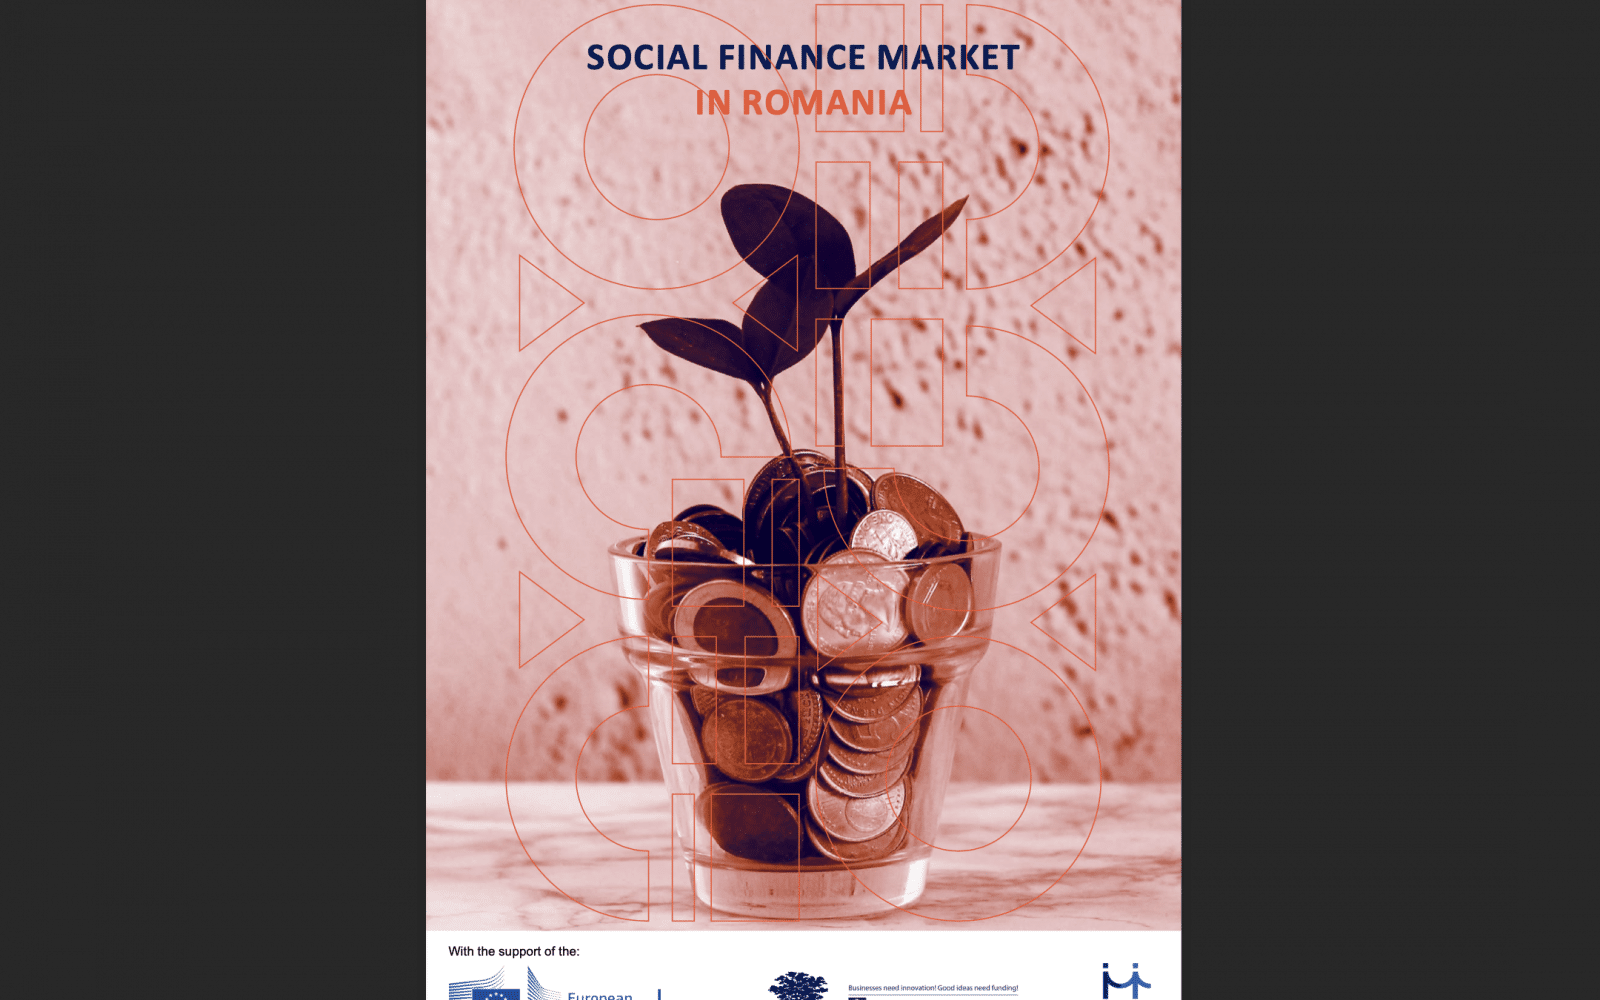 Cover of social finance report in Romania - plant vase with money in it 